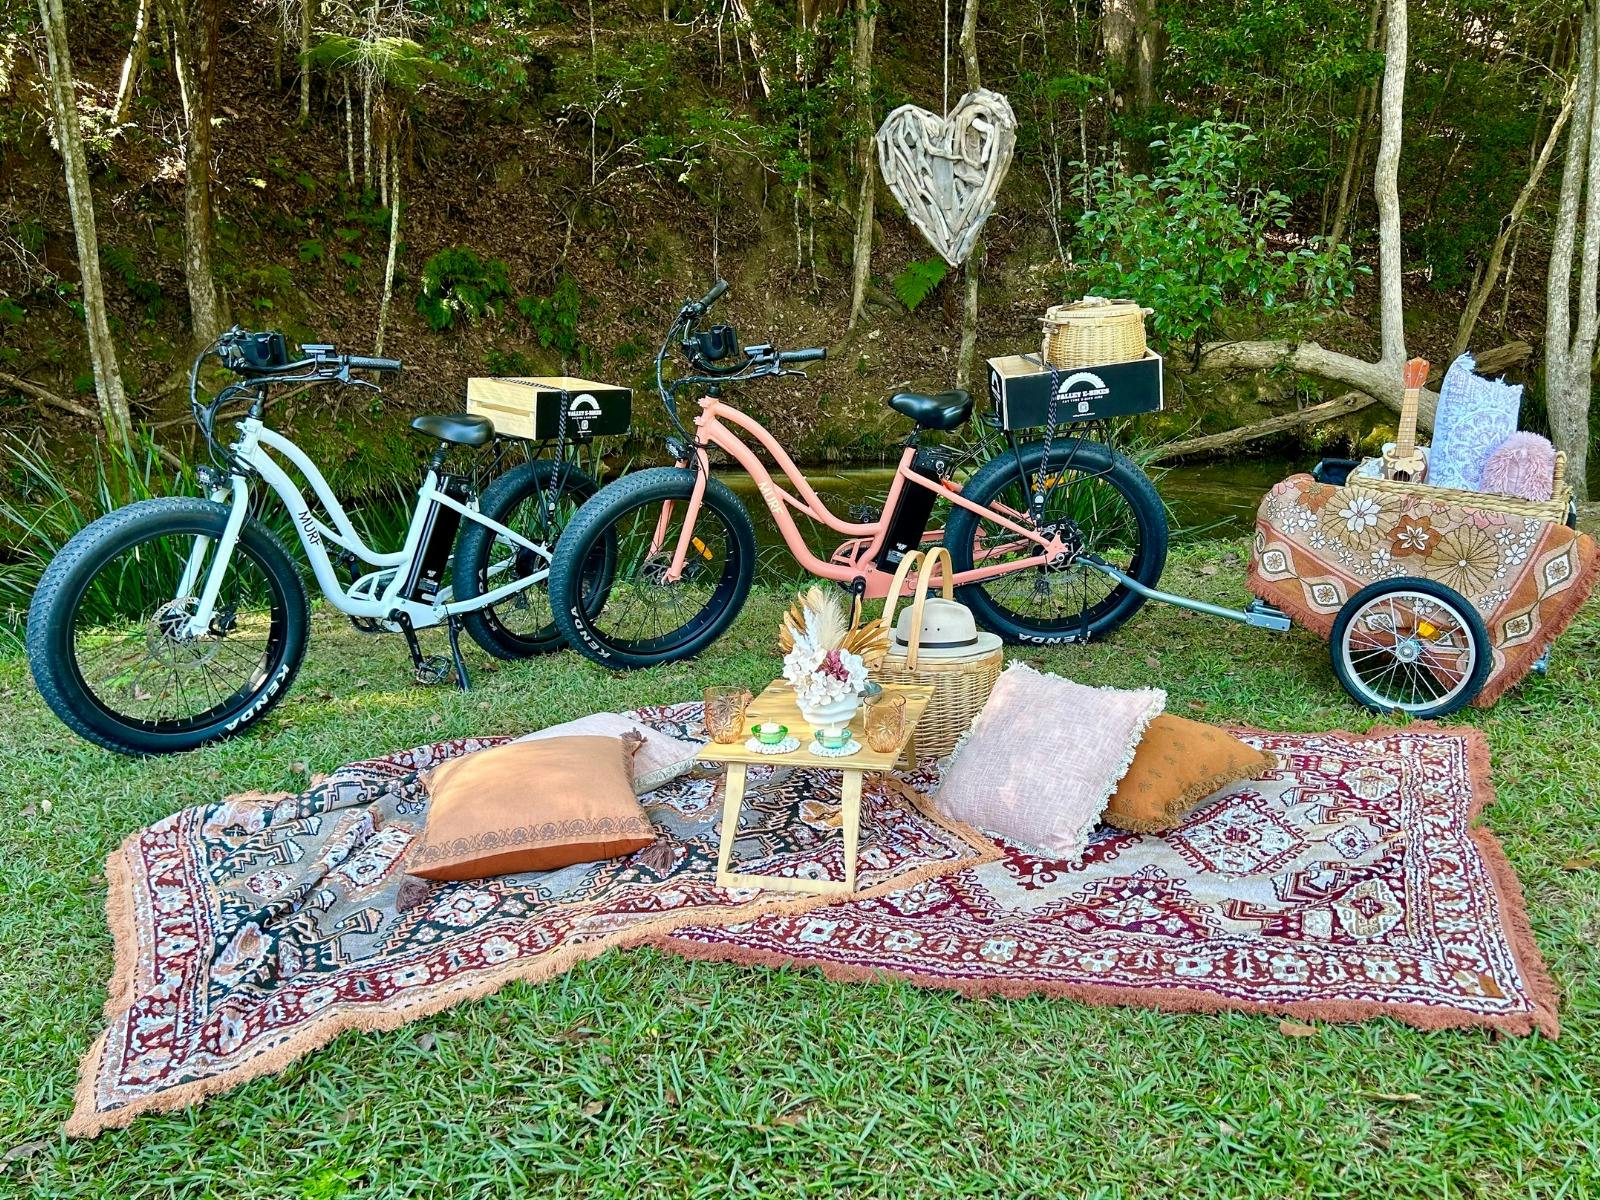 Hire ebikes and a DIY picnic setup for your day on the Northern Rivers Rail Trail